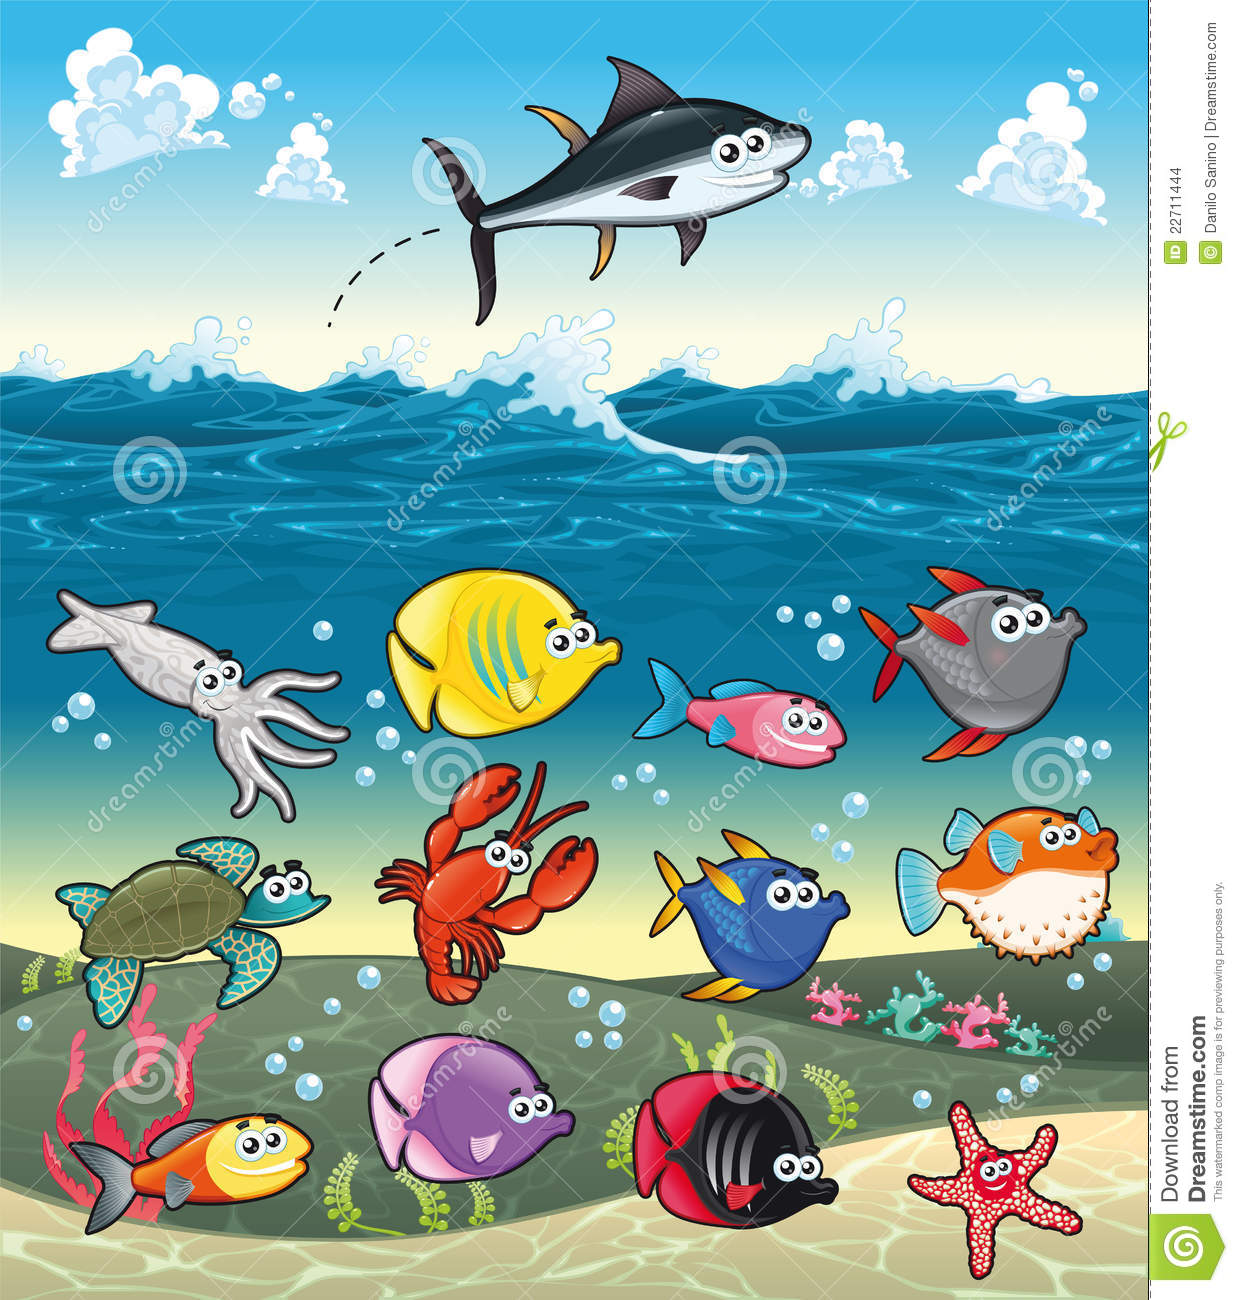 More Similar Stock Images Of   Family Of Funny Fish Under The Sea